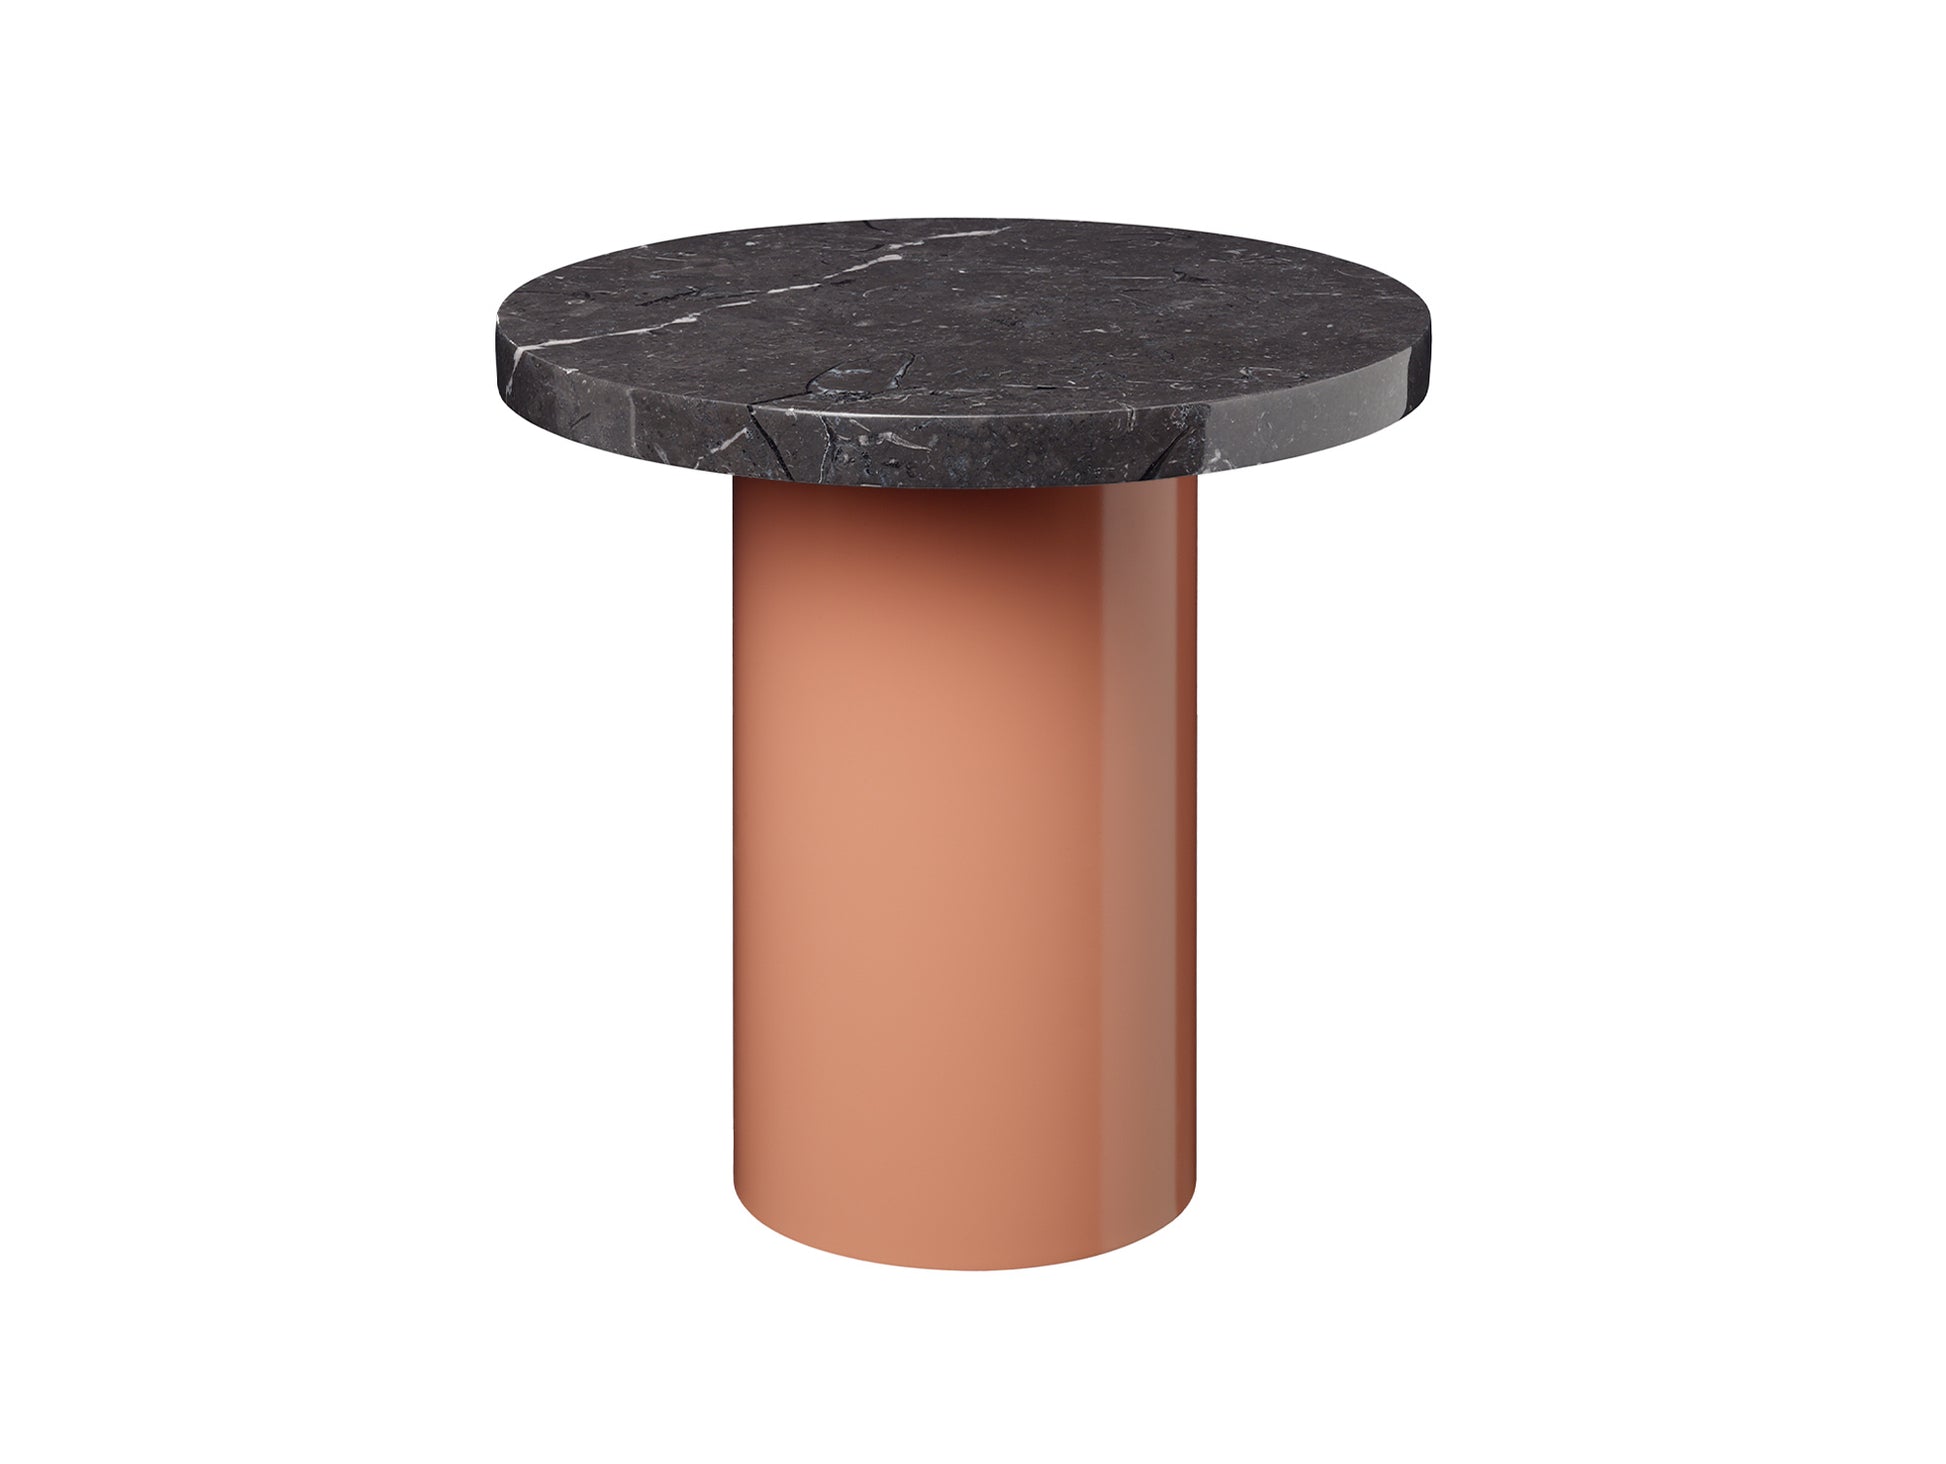 CT09 Enoki Side Table by e15 - (D40 H40 cm) Nero Marquina Marble Tabletop / Red Beige Steel Base